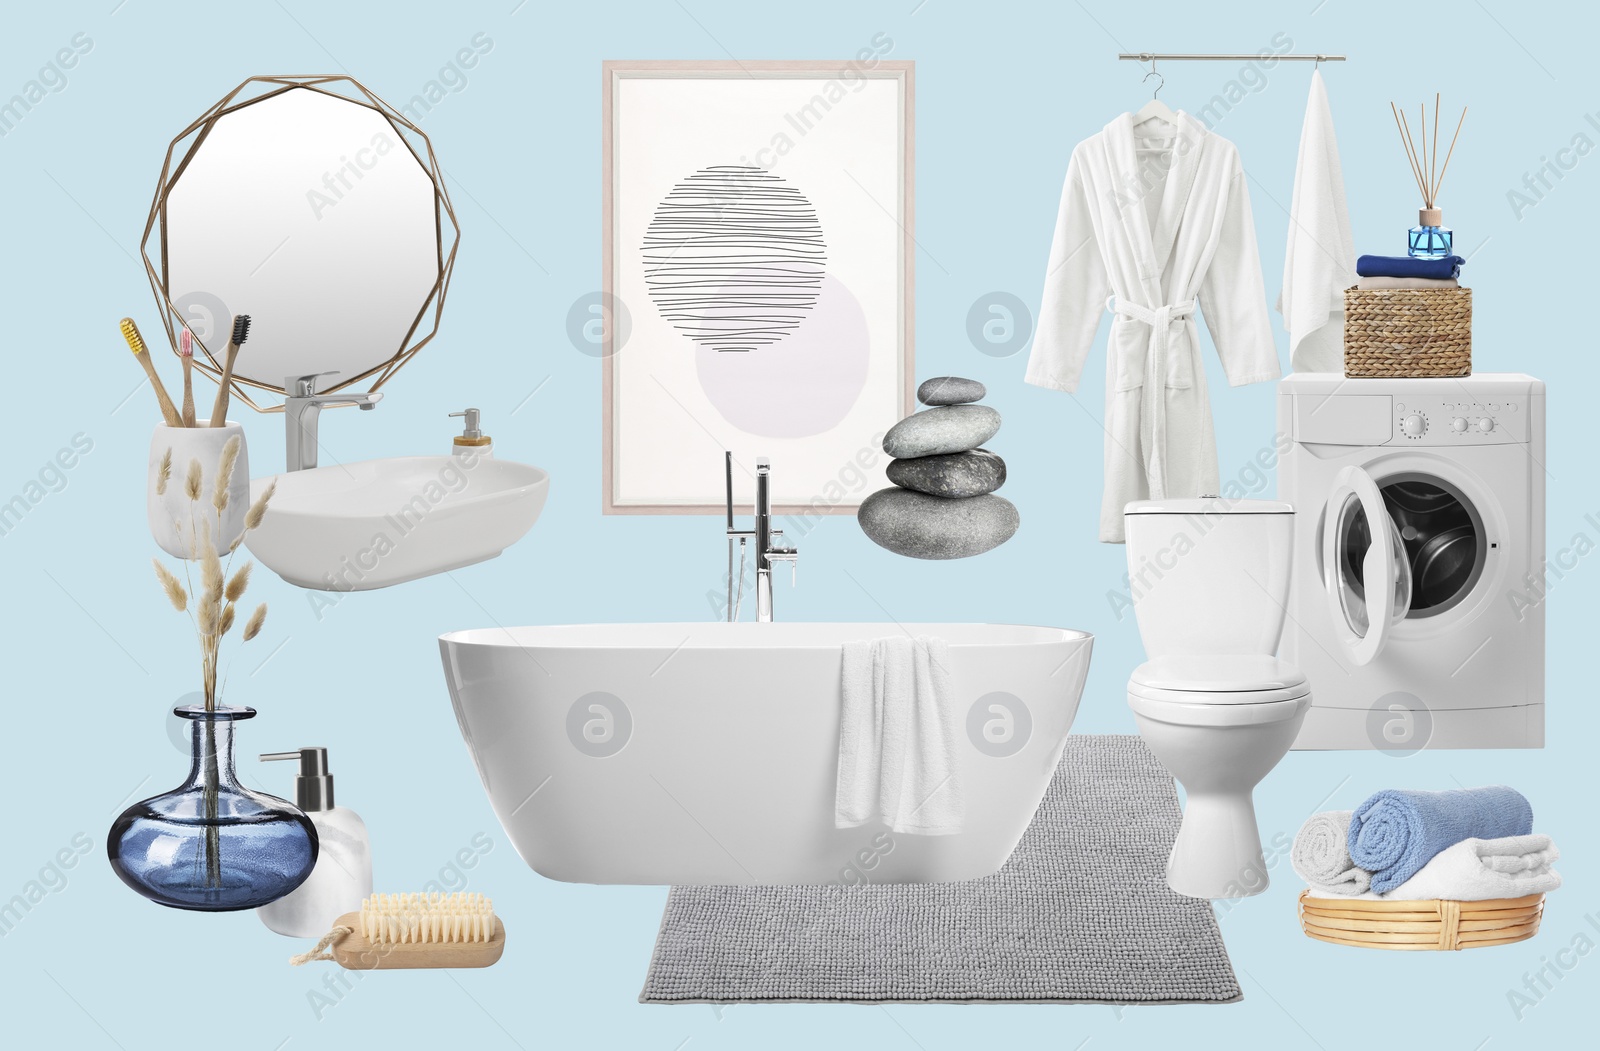 Image of Bathroom interior design. Collage with different combinable items and decorative elements on pale light blue background